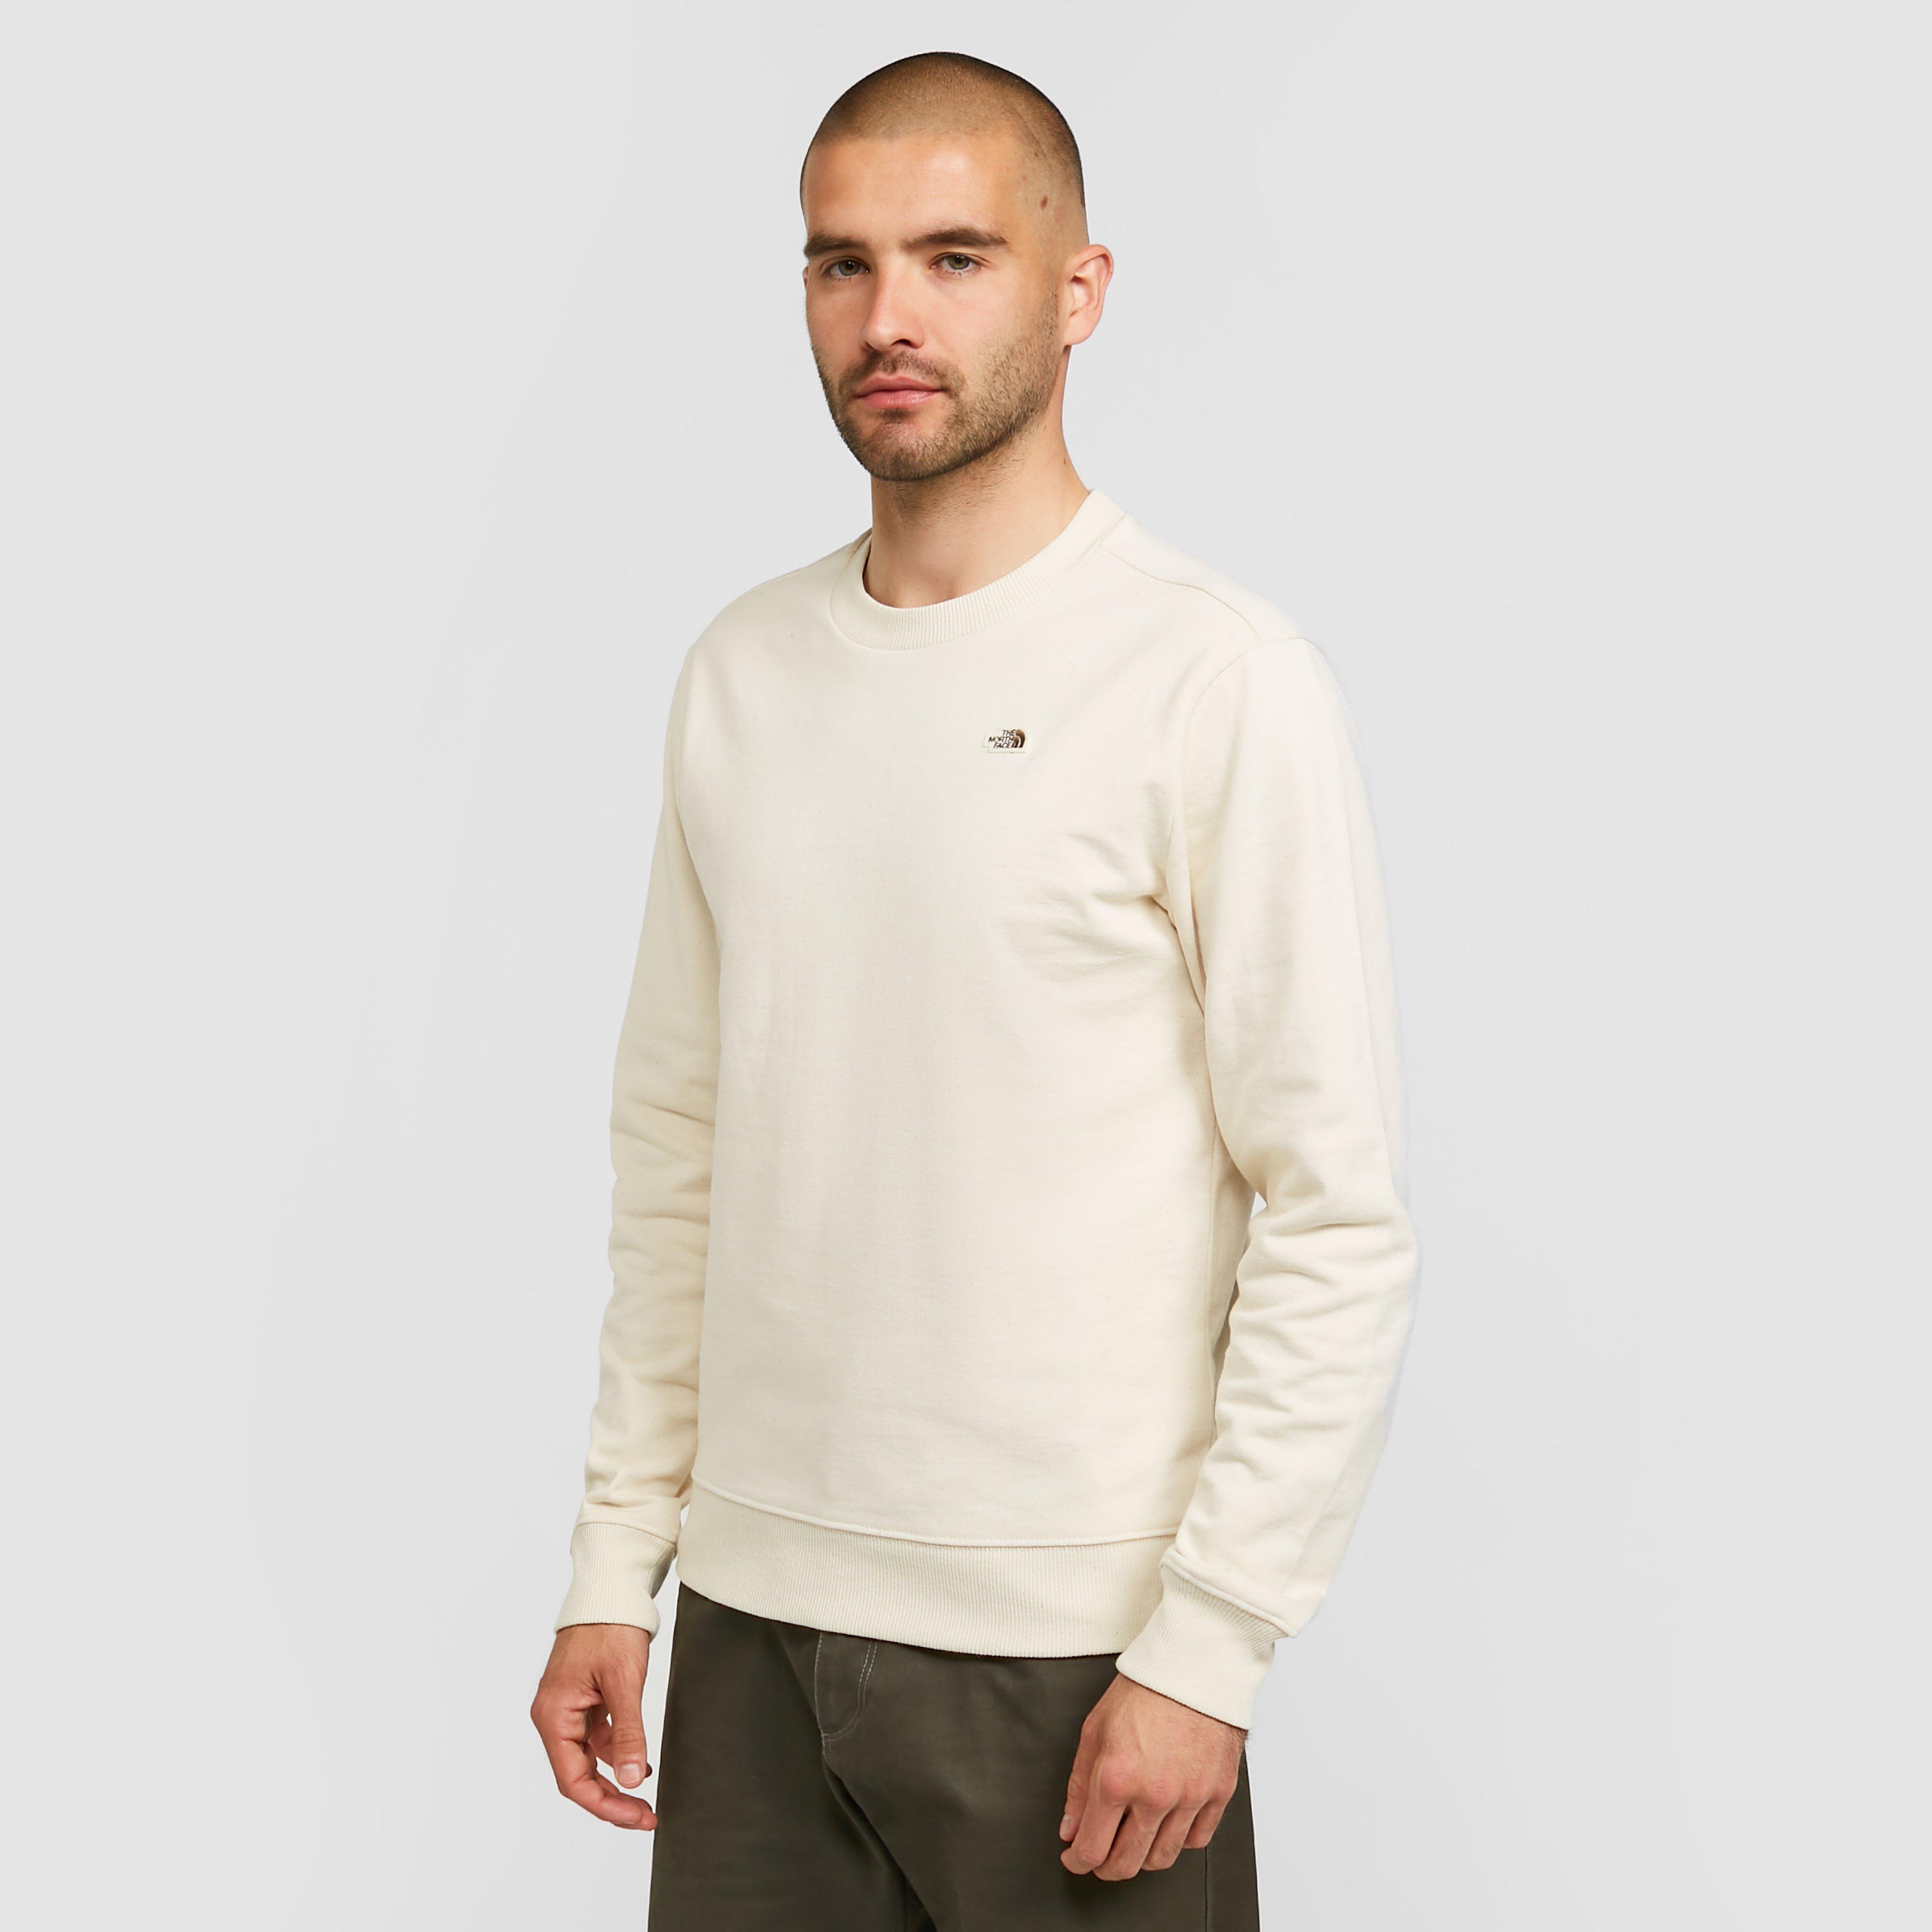 Image of The North Face Men's Recycled Scrap Sweater - White/Wht, White/WHT